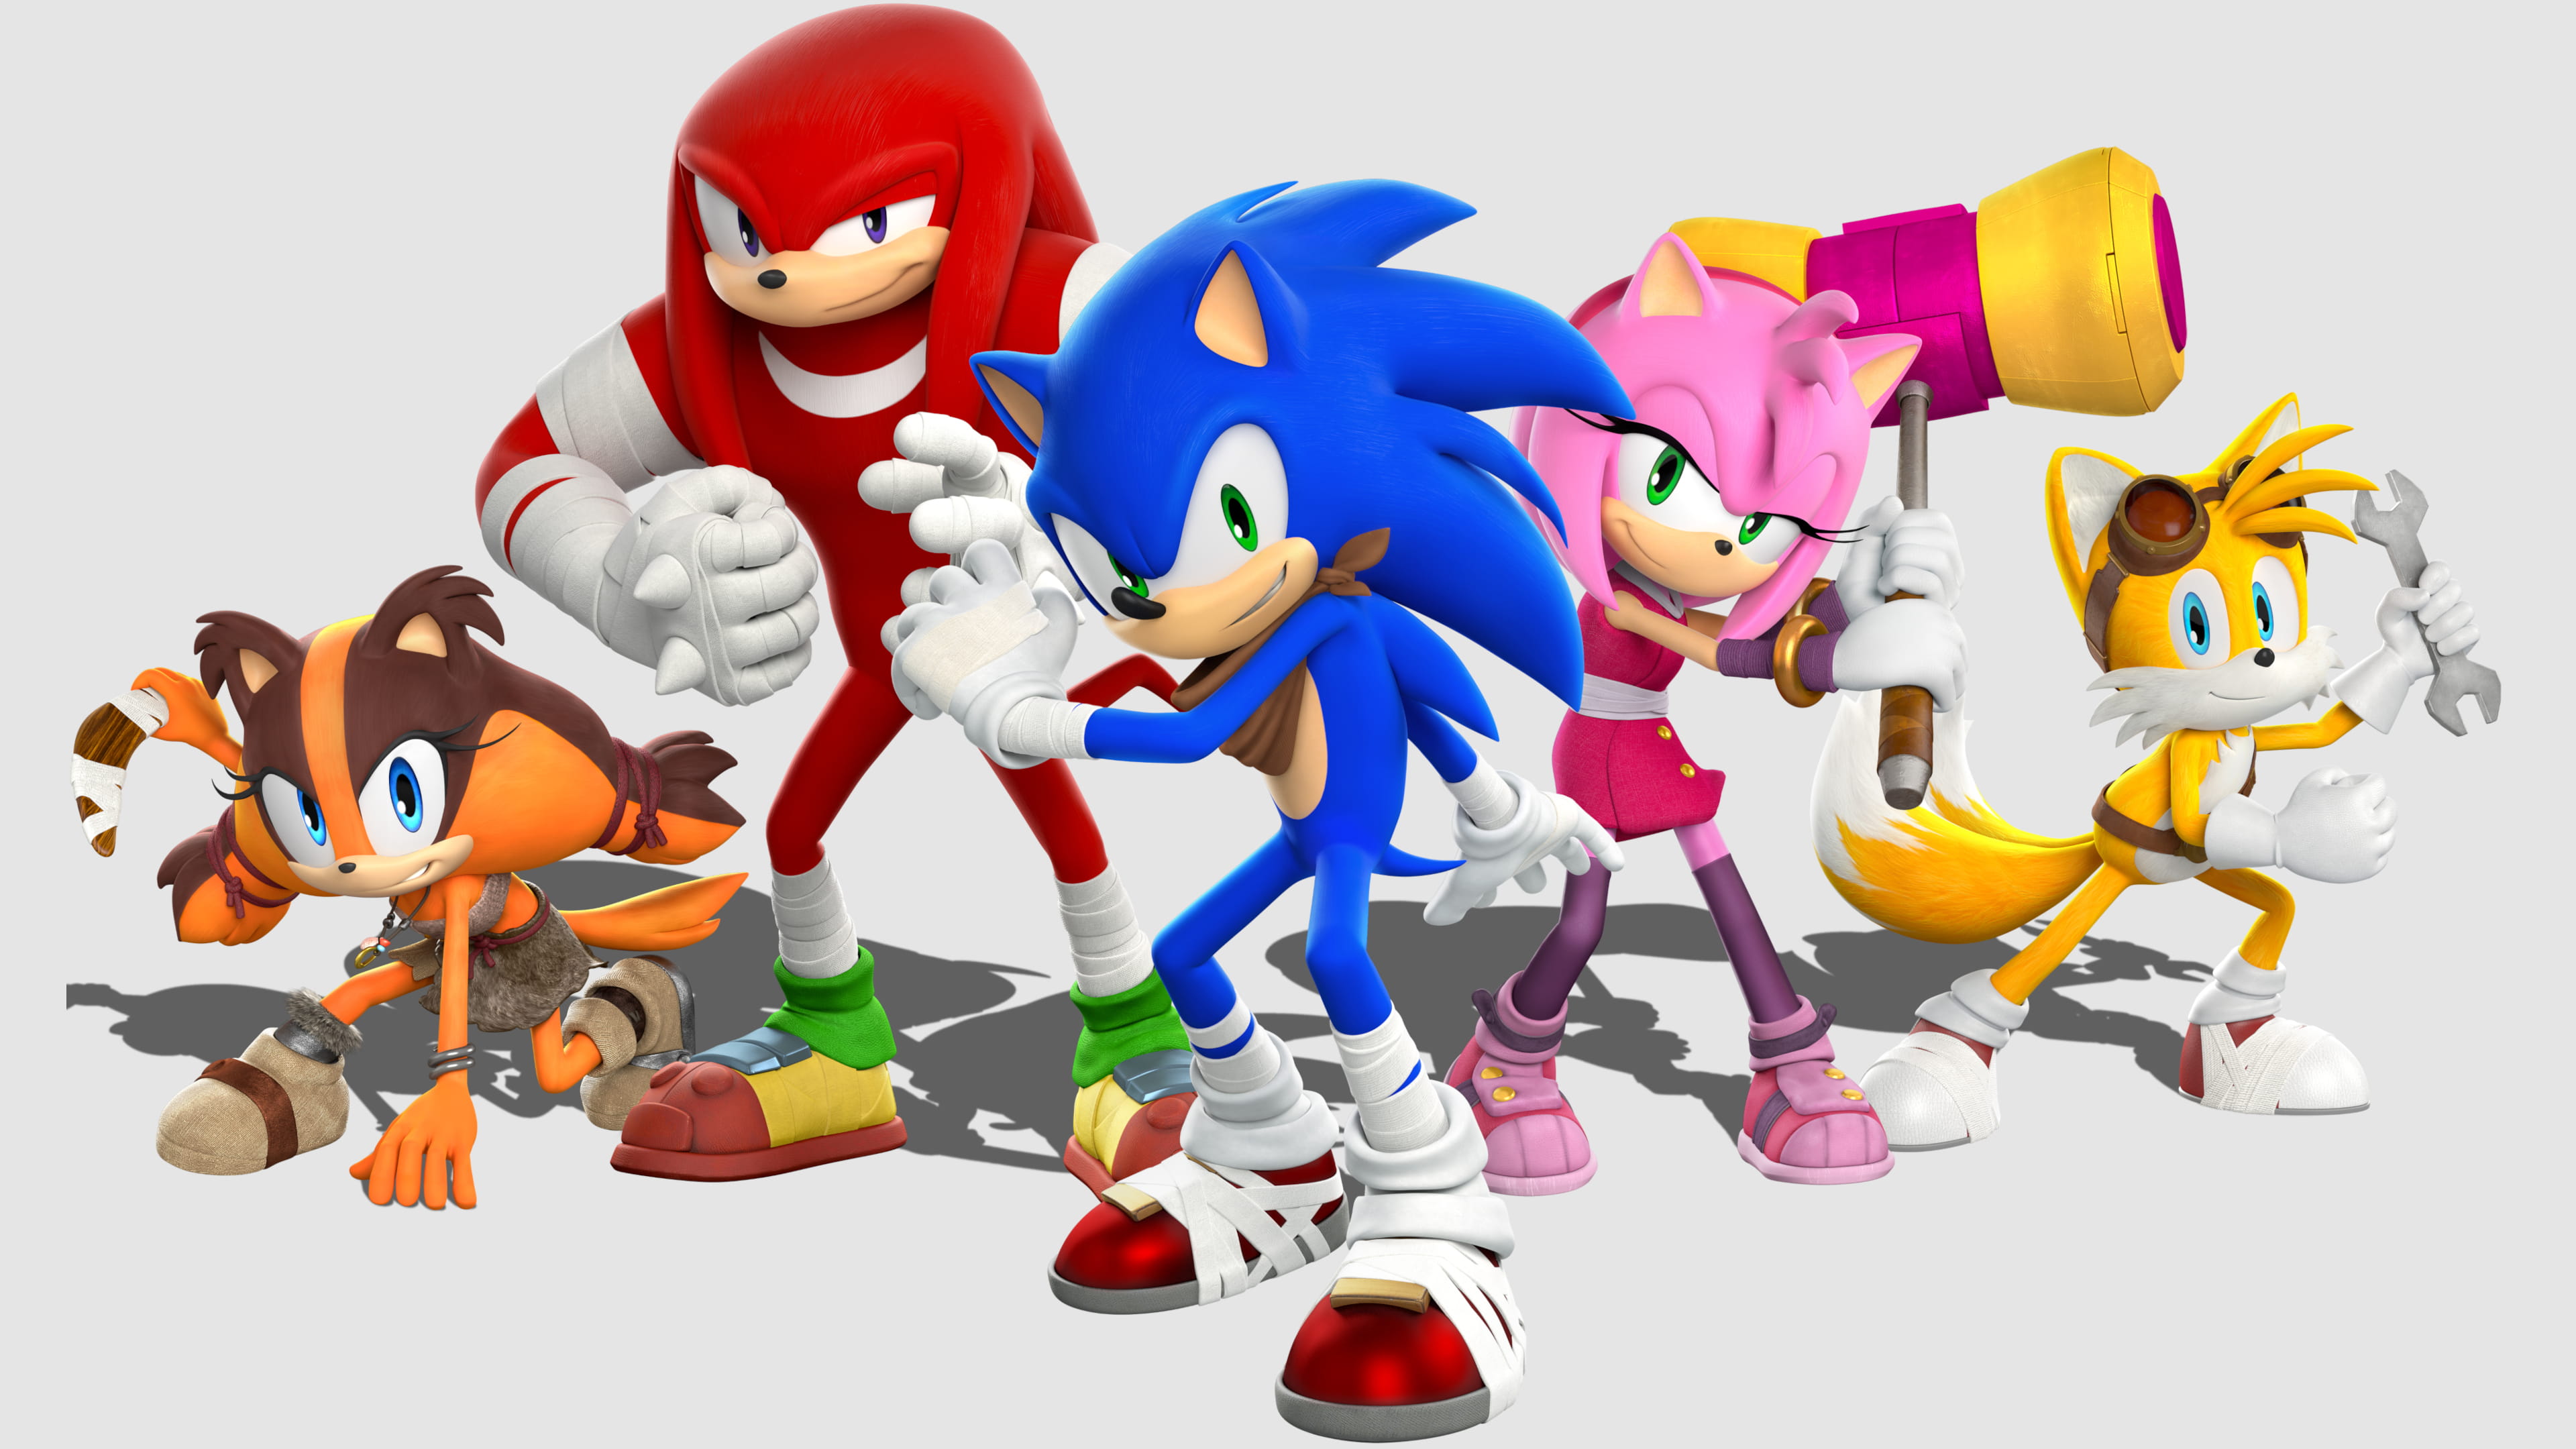 Sonic Boom: Shattered Crystal